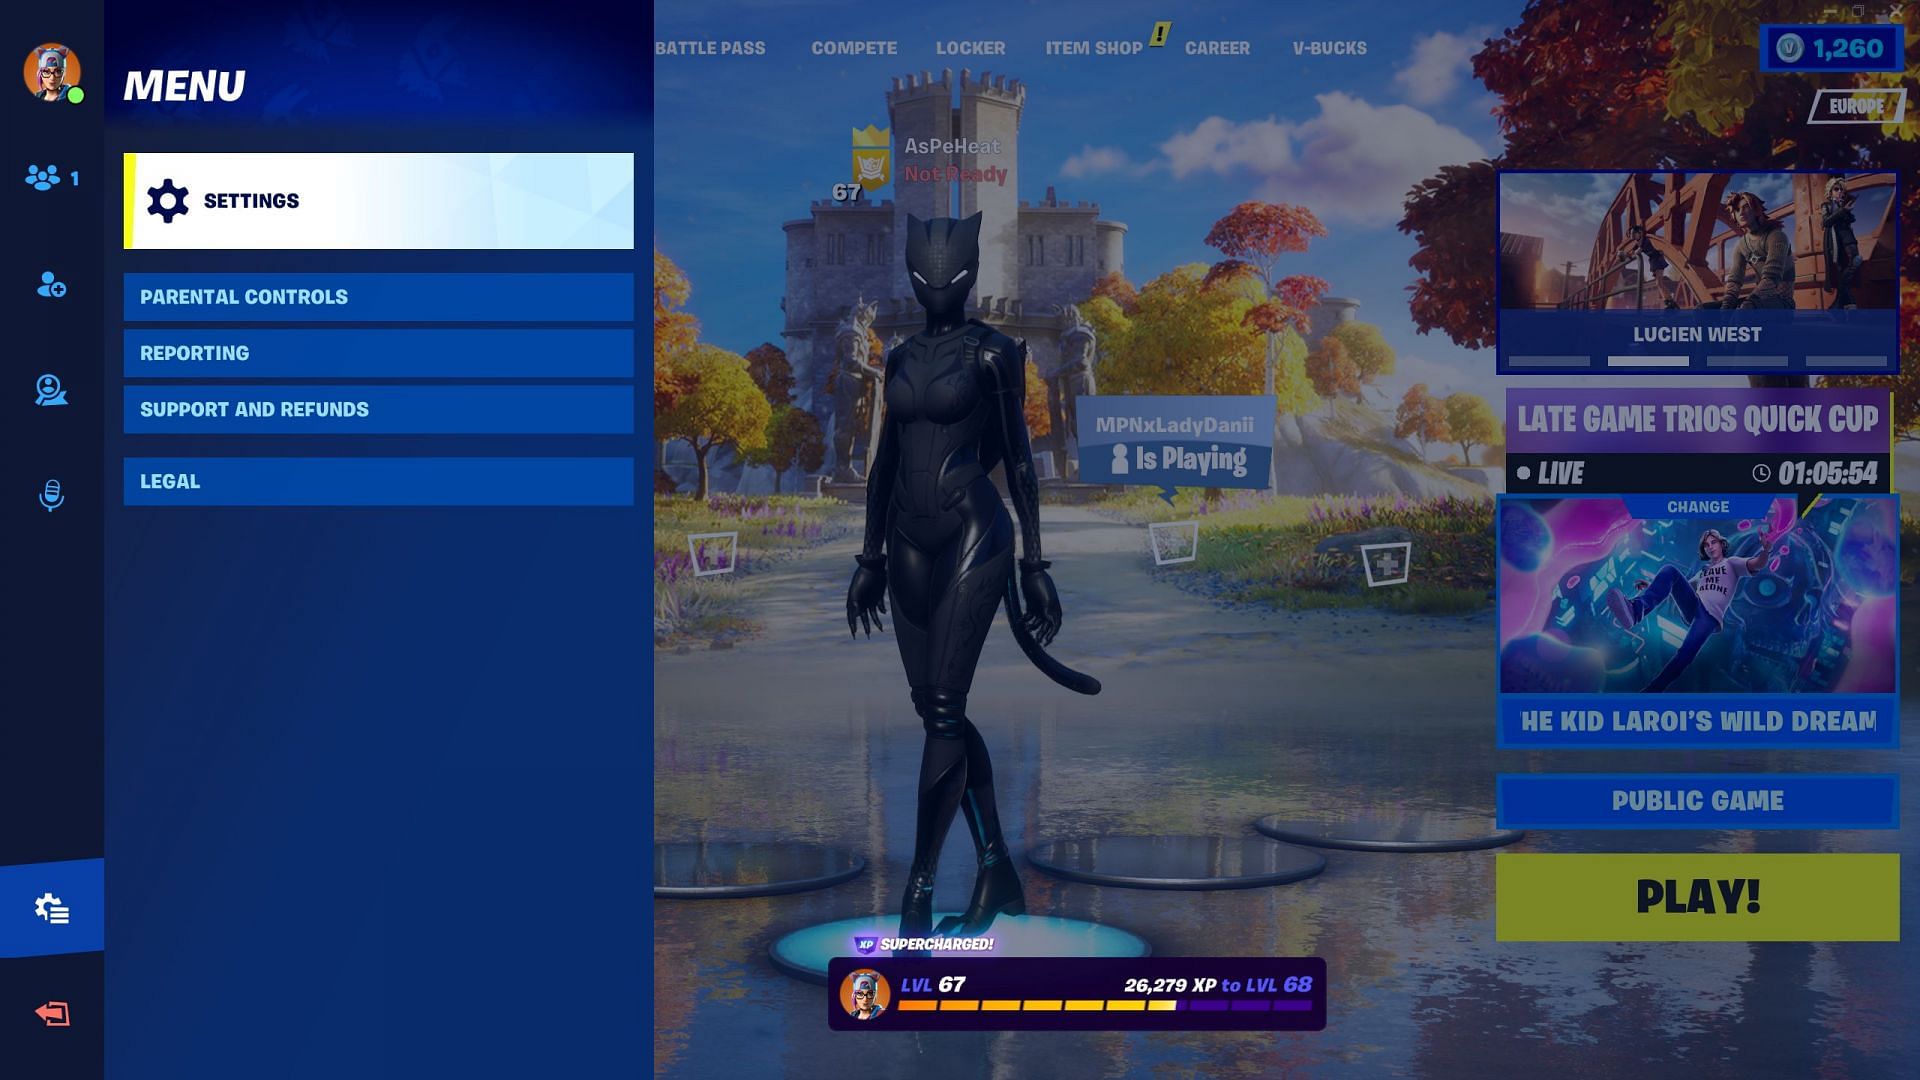 To enable visual clues for Fortnite footsteps, you first need to open in-game settings (Image via Epic Games)